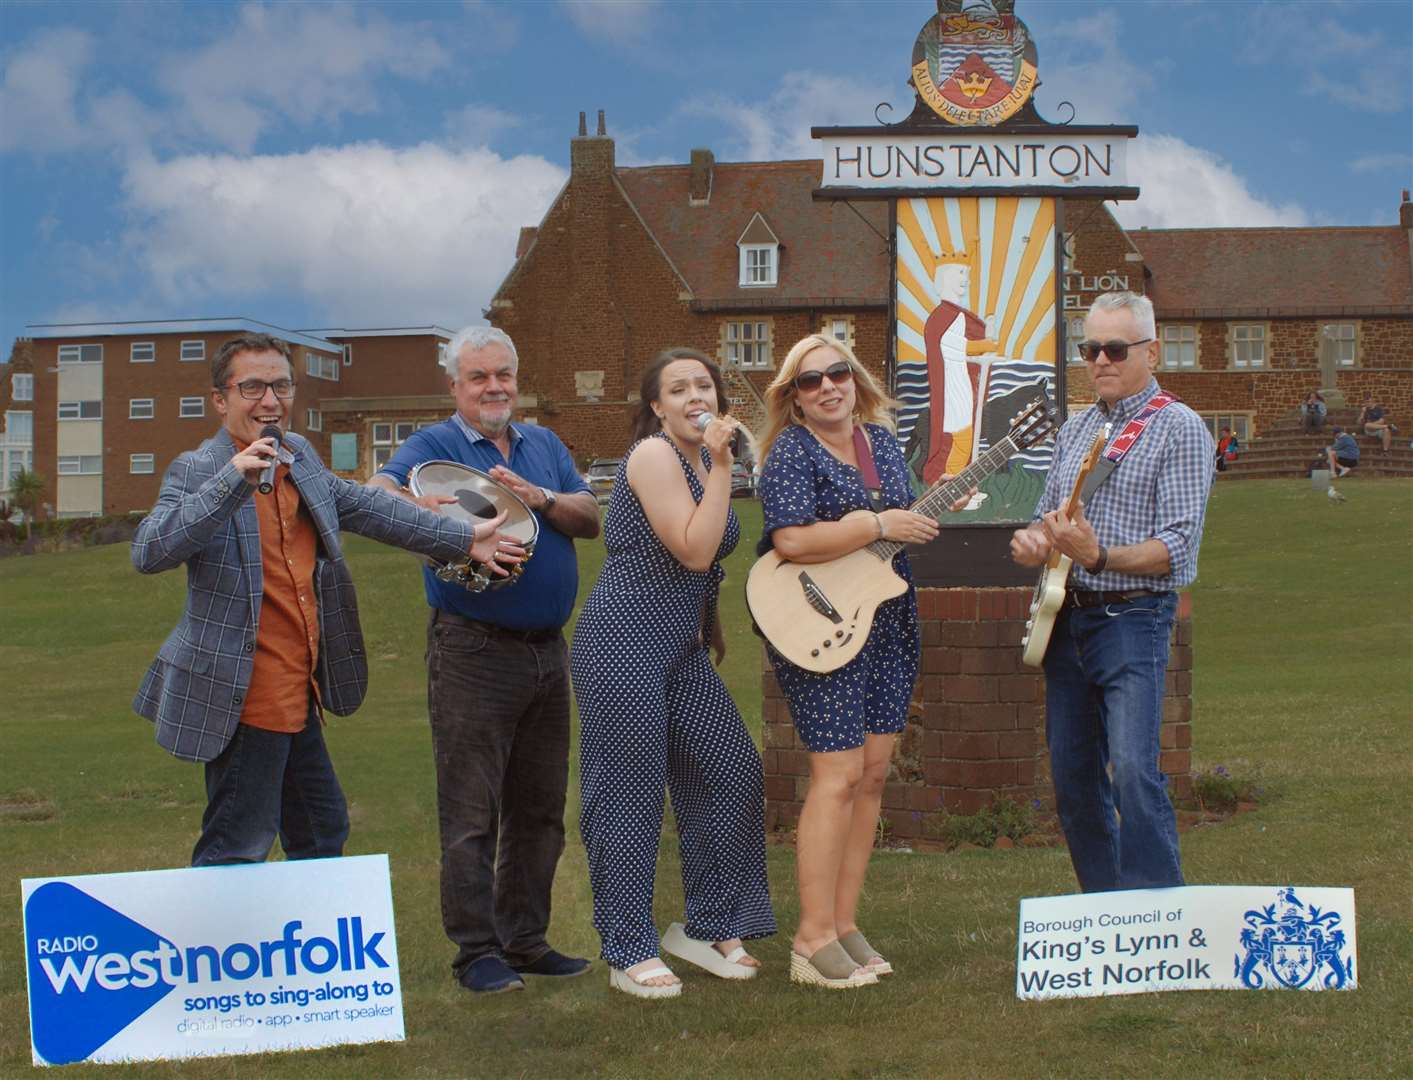 Launch of West Norfolk Battle of the Bands: from left, Simon Rowe from Radio West Norfolk, Martyn from Second Sunset (drums), Imogen from Second Sunset (vocals and harmony), Laura from Second Sunset (vocals and harmony) and Peter from Second Sunset (guitar)